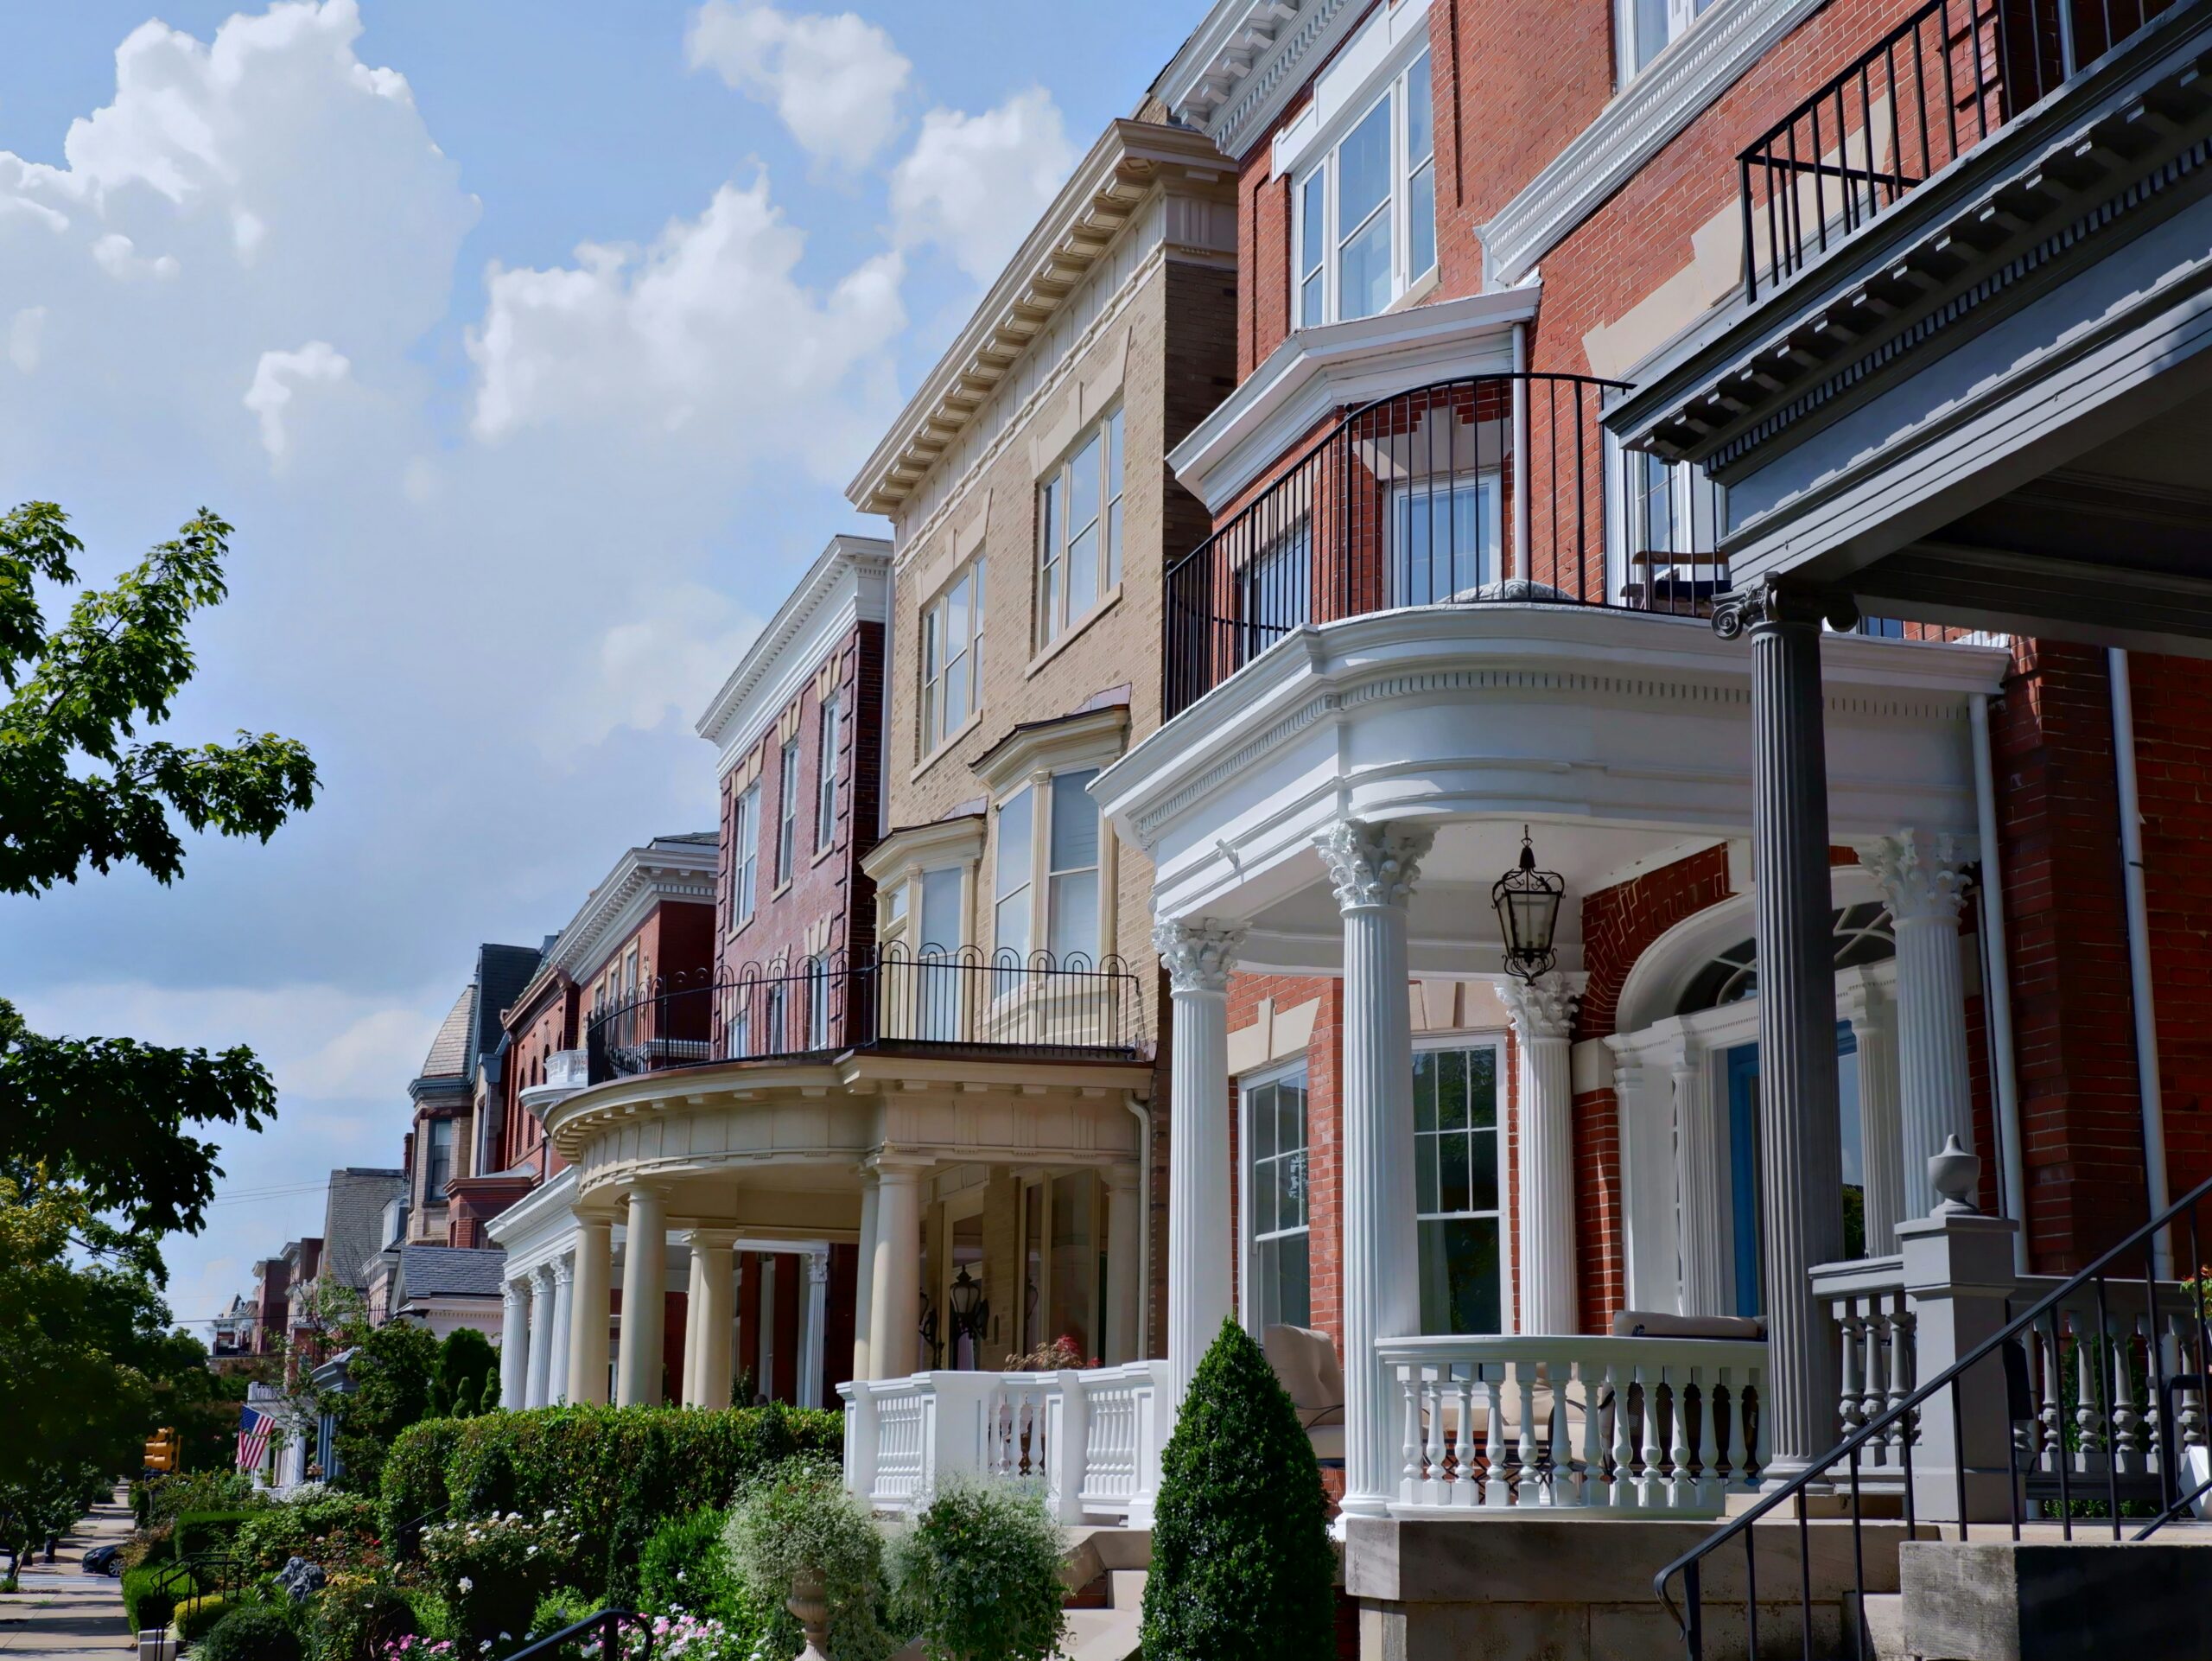 Richmond is the best place to live in Virginia for those wanting to live in a mid-sized city. Pictured: A row of homes in Richmond